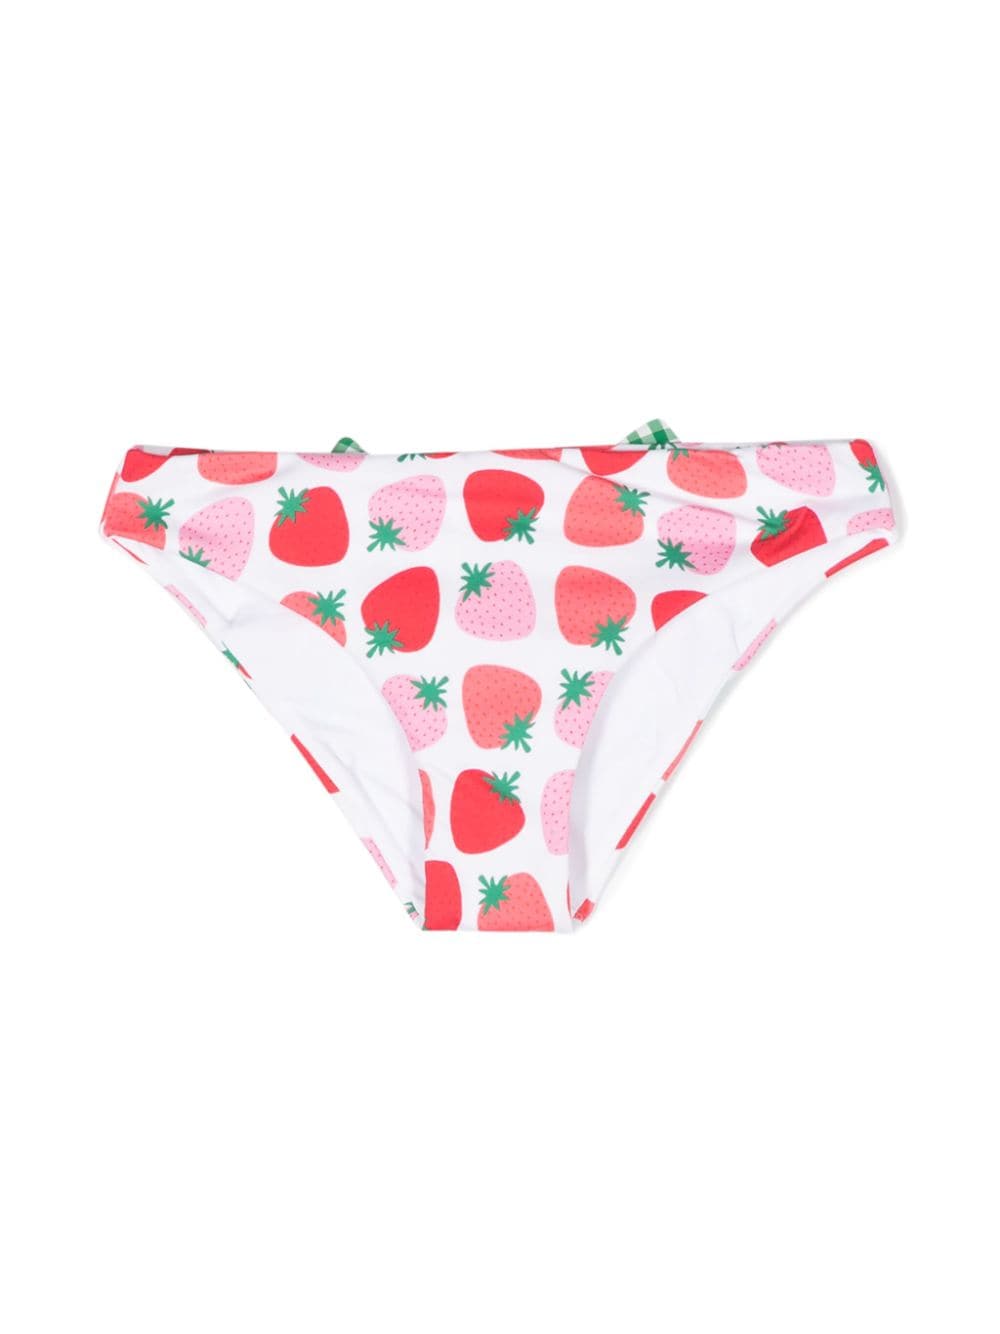 Multicolored briefs for girls with strawberries